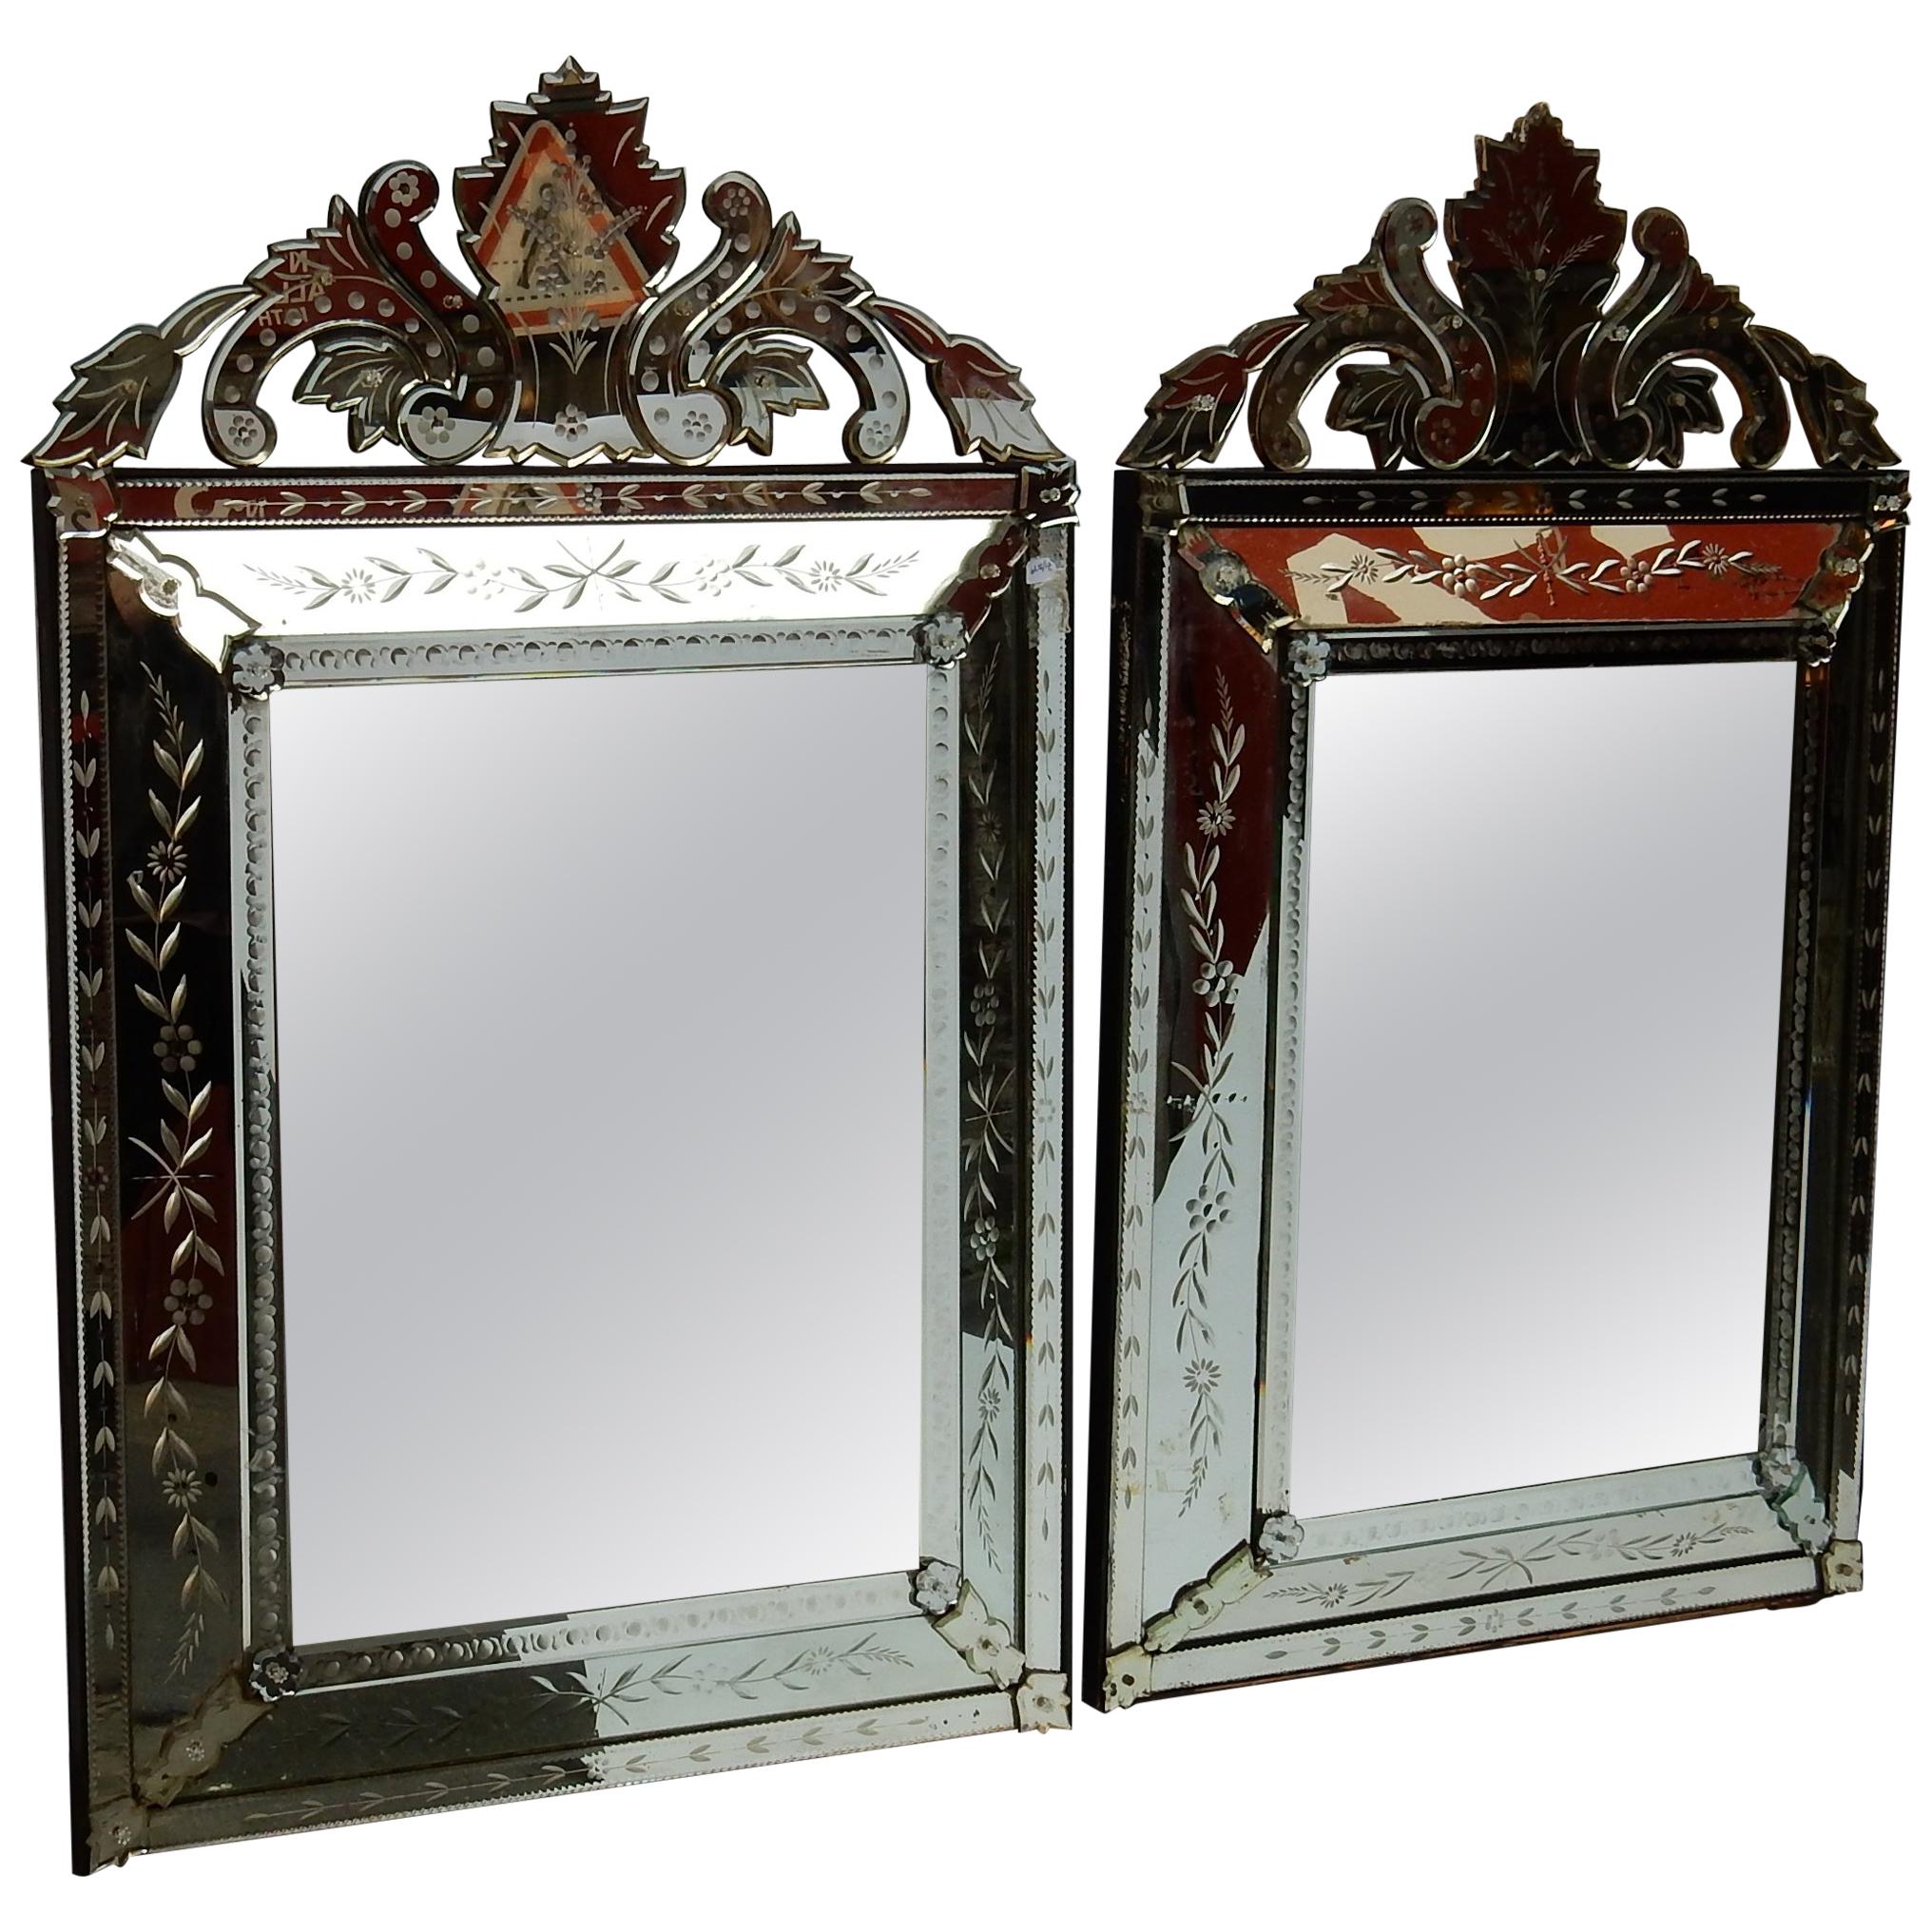 1950s Pair of Venetian Mirrors with Floral Decor and Pediment